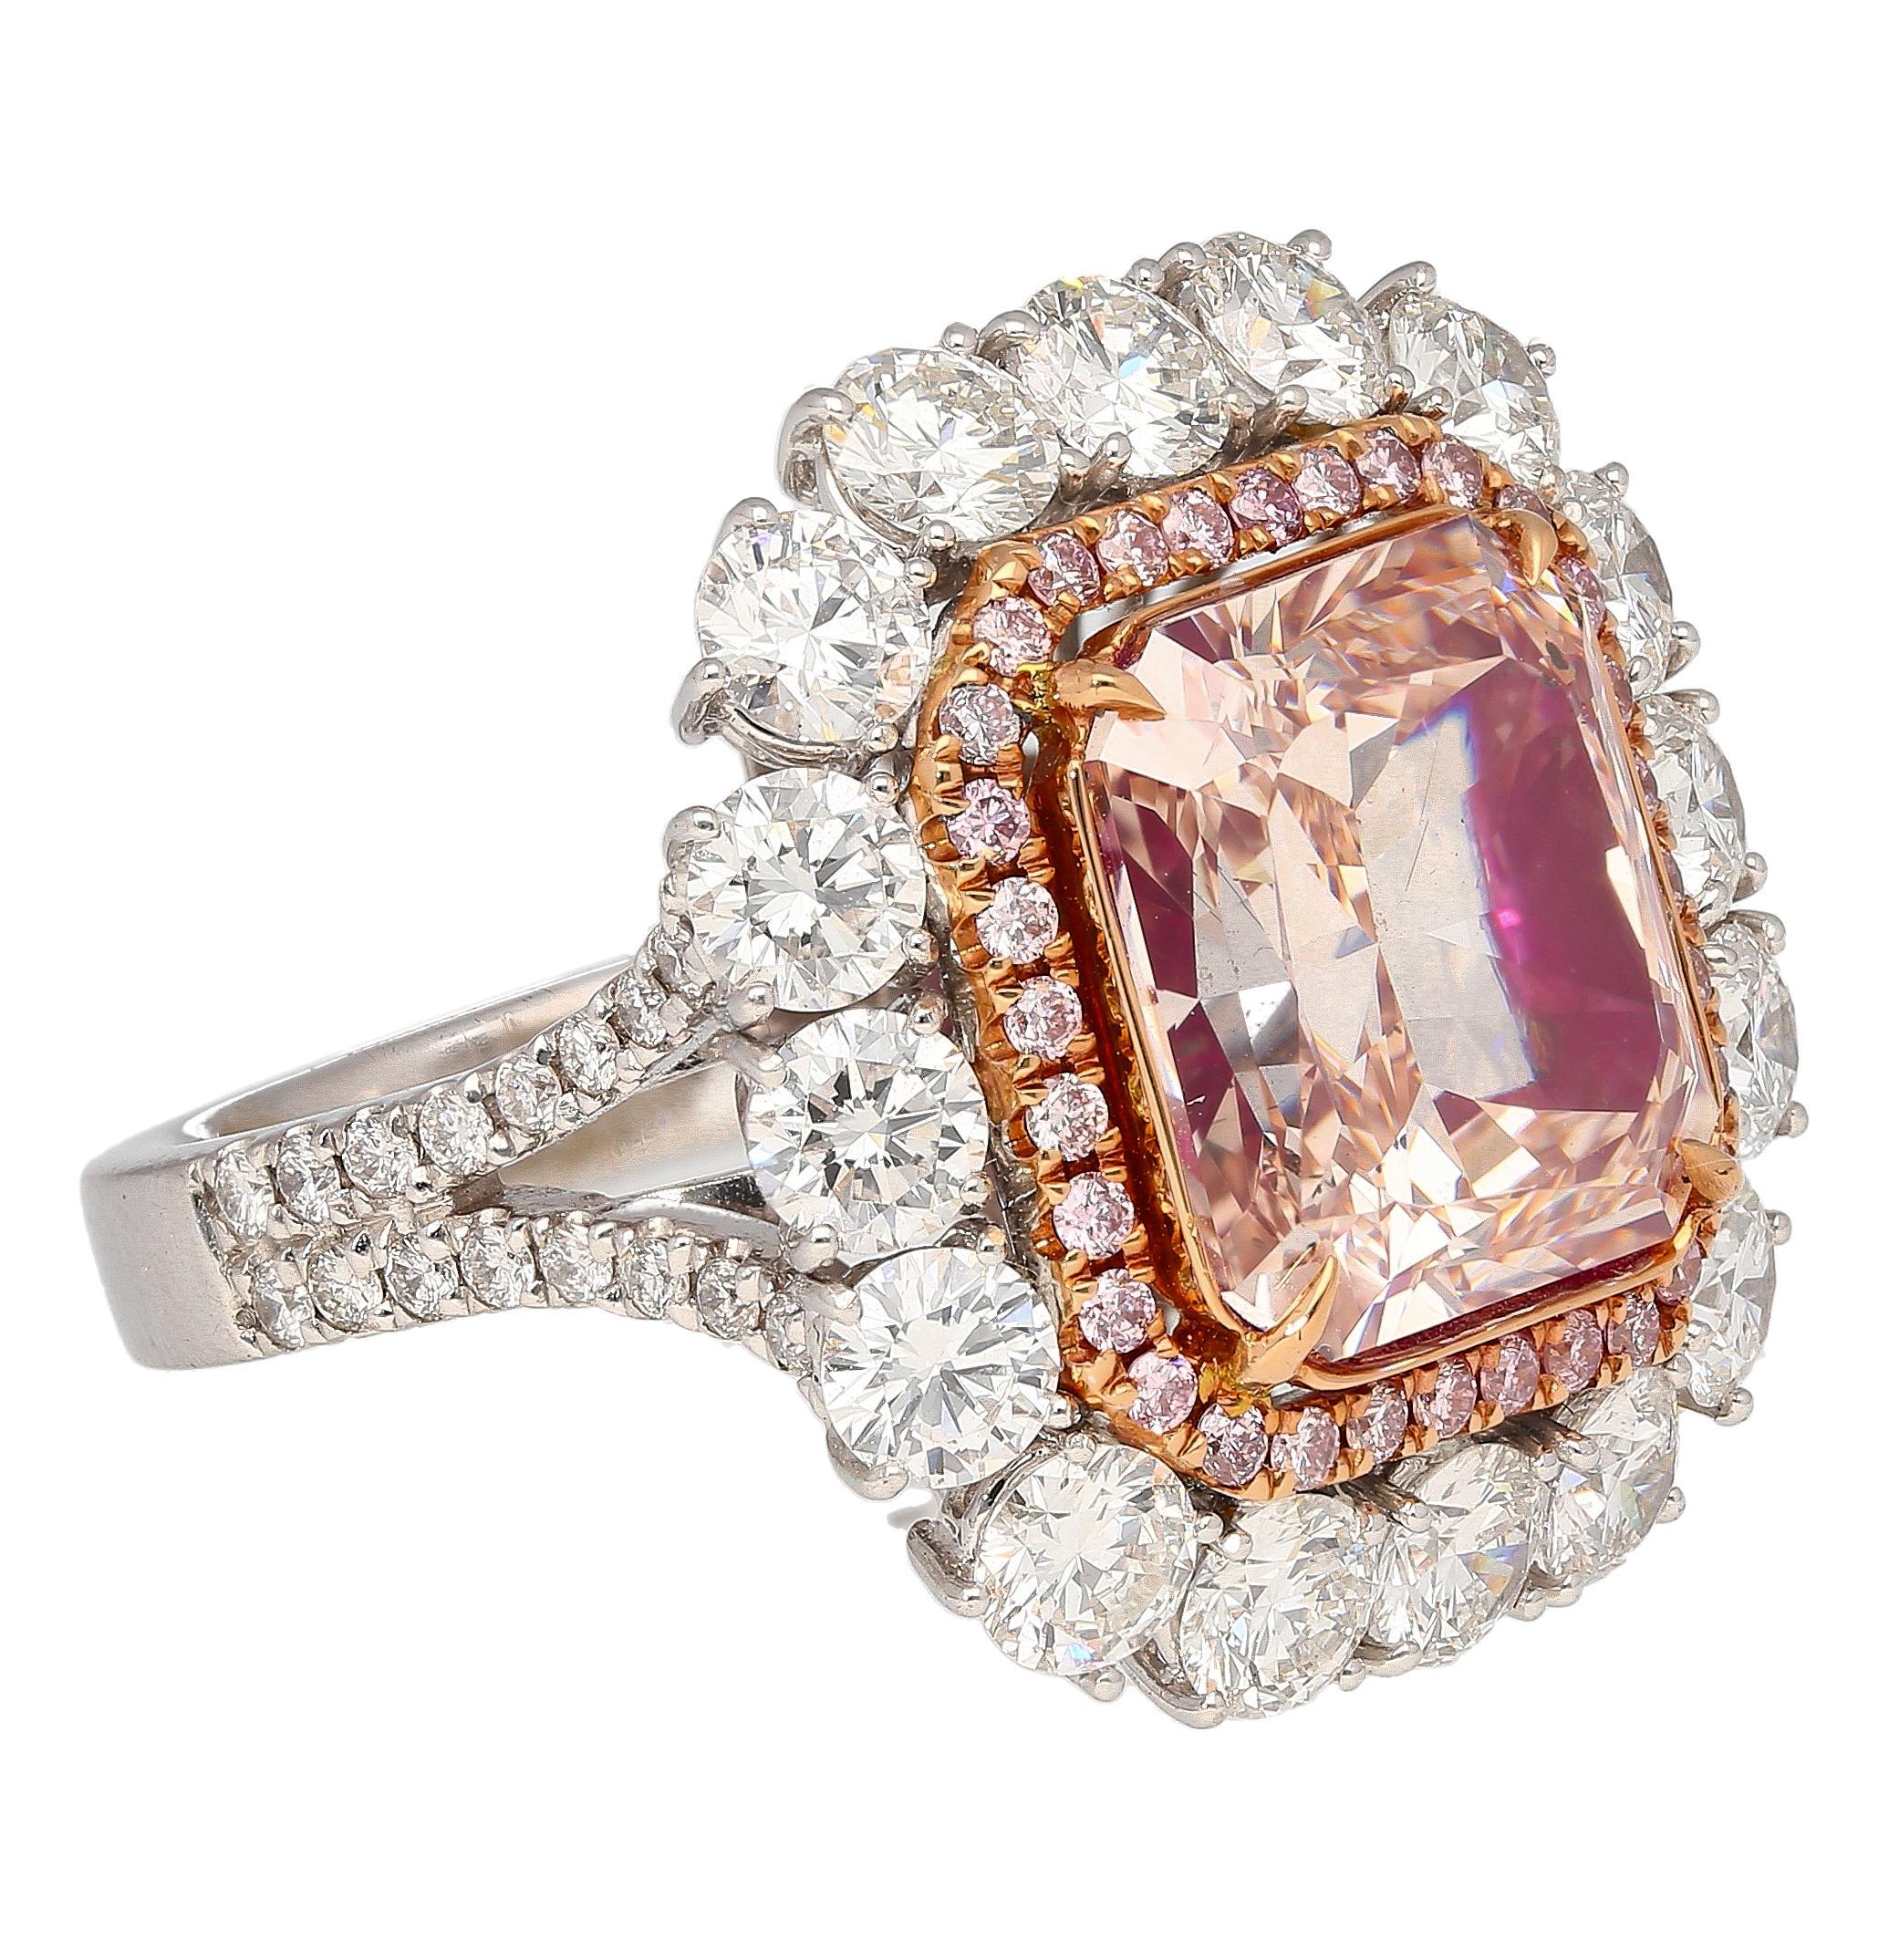 GIA Certified 6.53 Carat Fancy Pink-Brown & White Diamond Ring in 18K Rose Gold In New Condition For Sale In Miami, FL